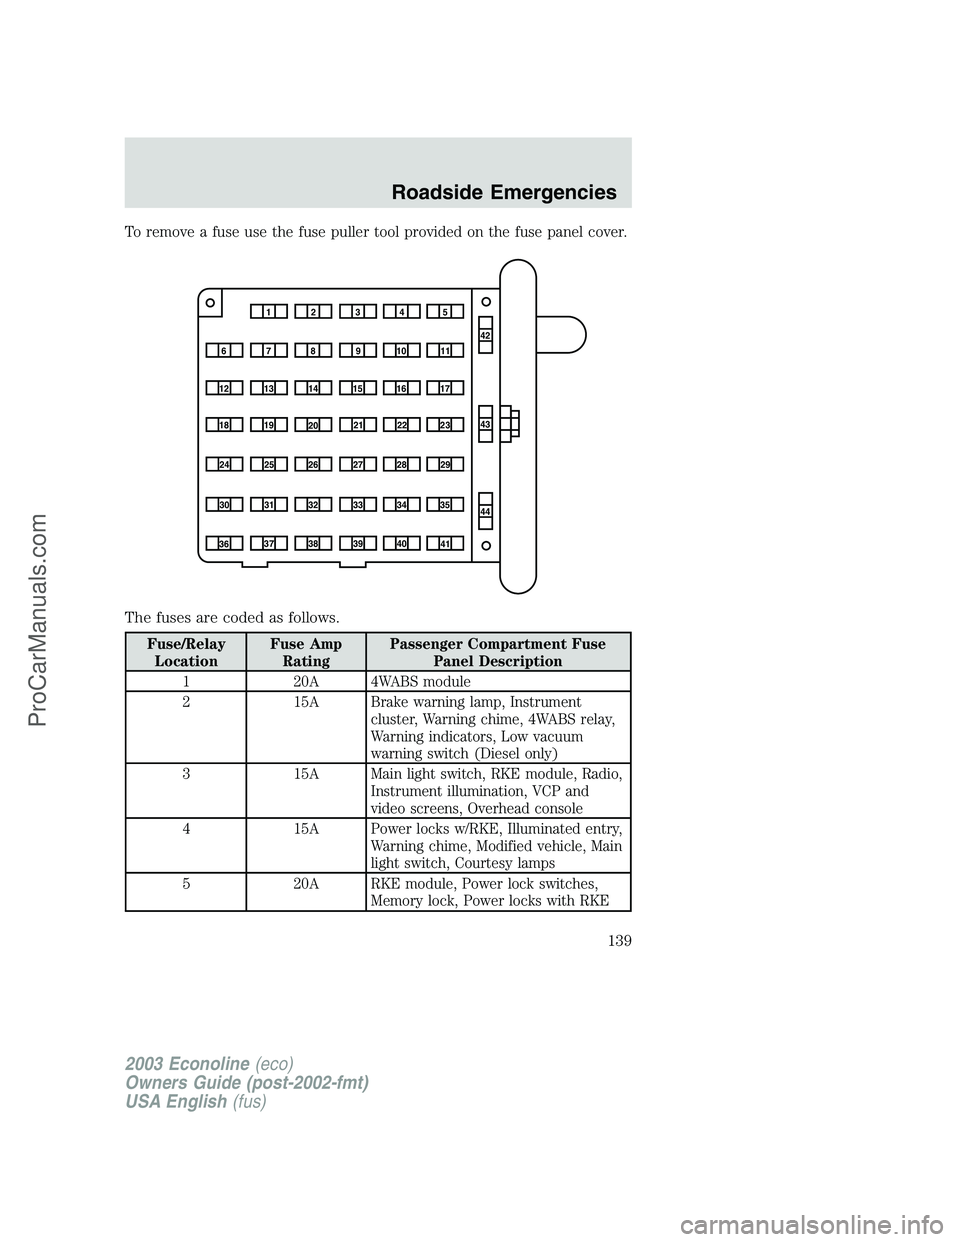 FORD E-450 2003  Owners Manual To remove a fuse use the fuse puller tool provided on the fuse panel cover.
The fuses are coded as follows.
Fuse/Relay
LocationFuse Amp
RatingPassenger Compartment Fuse
Panel Description
1 20A 4WABS m